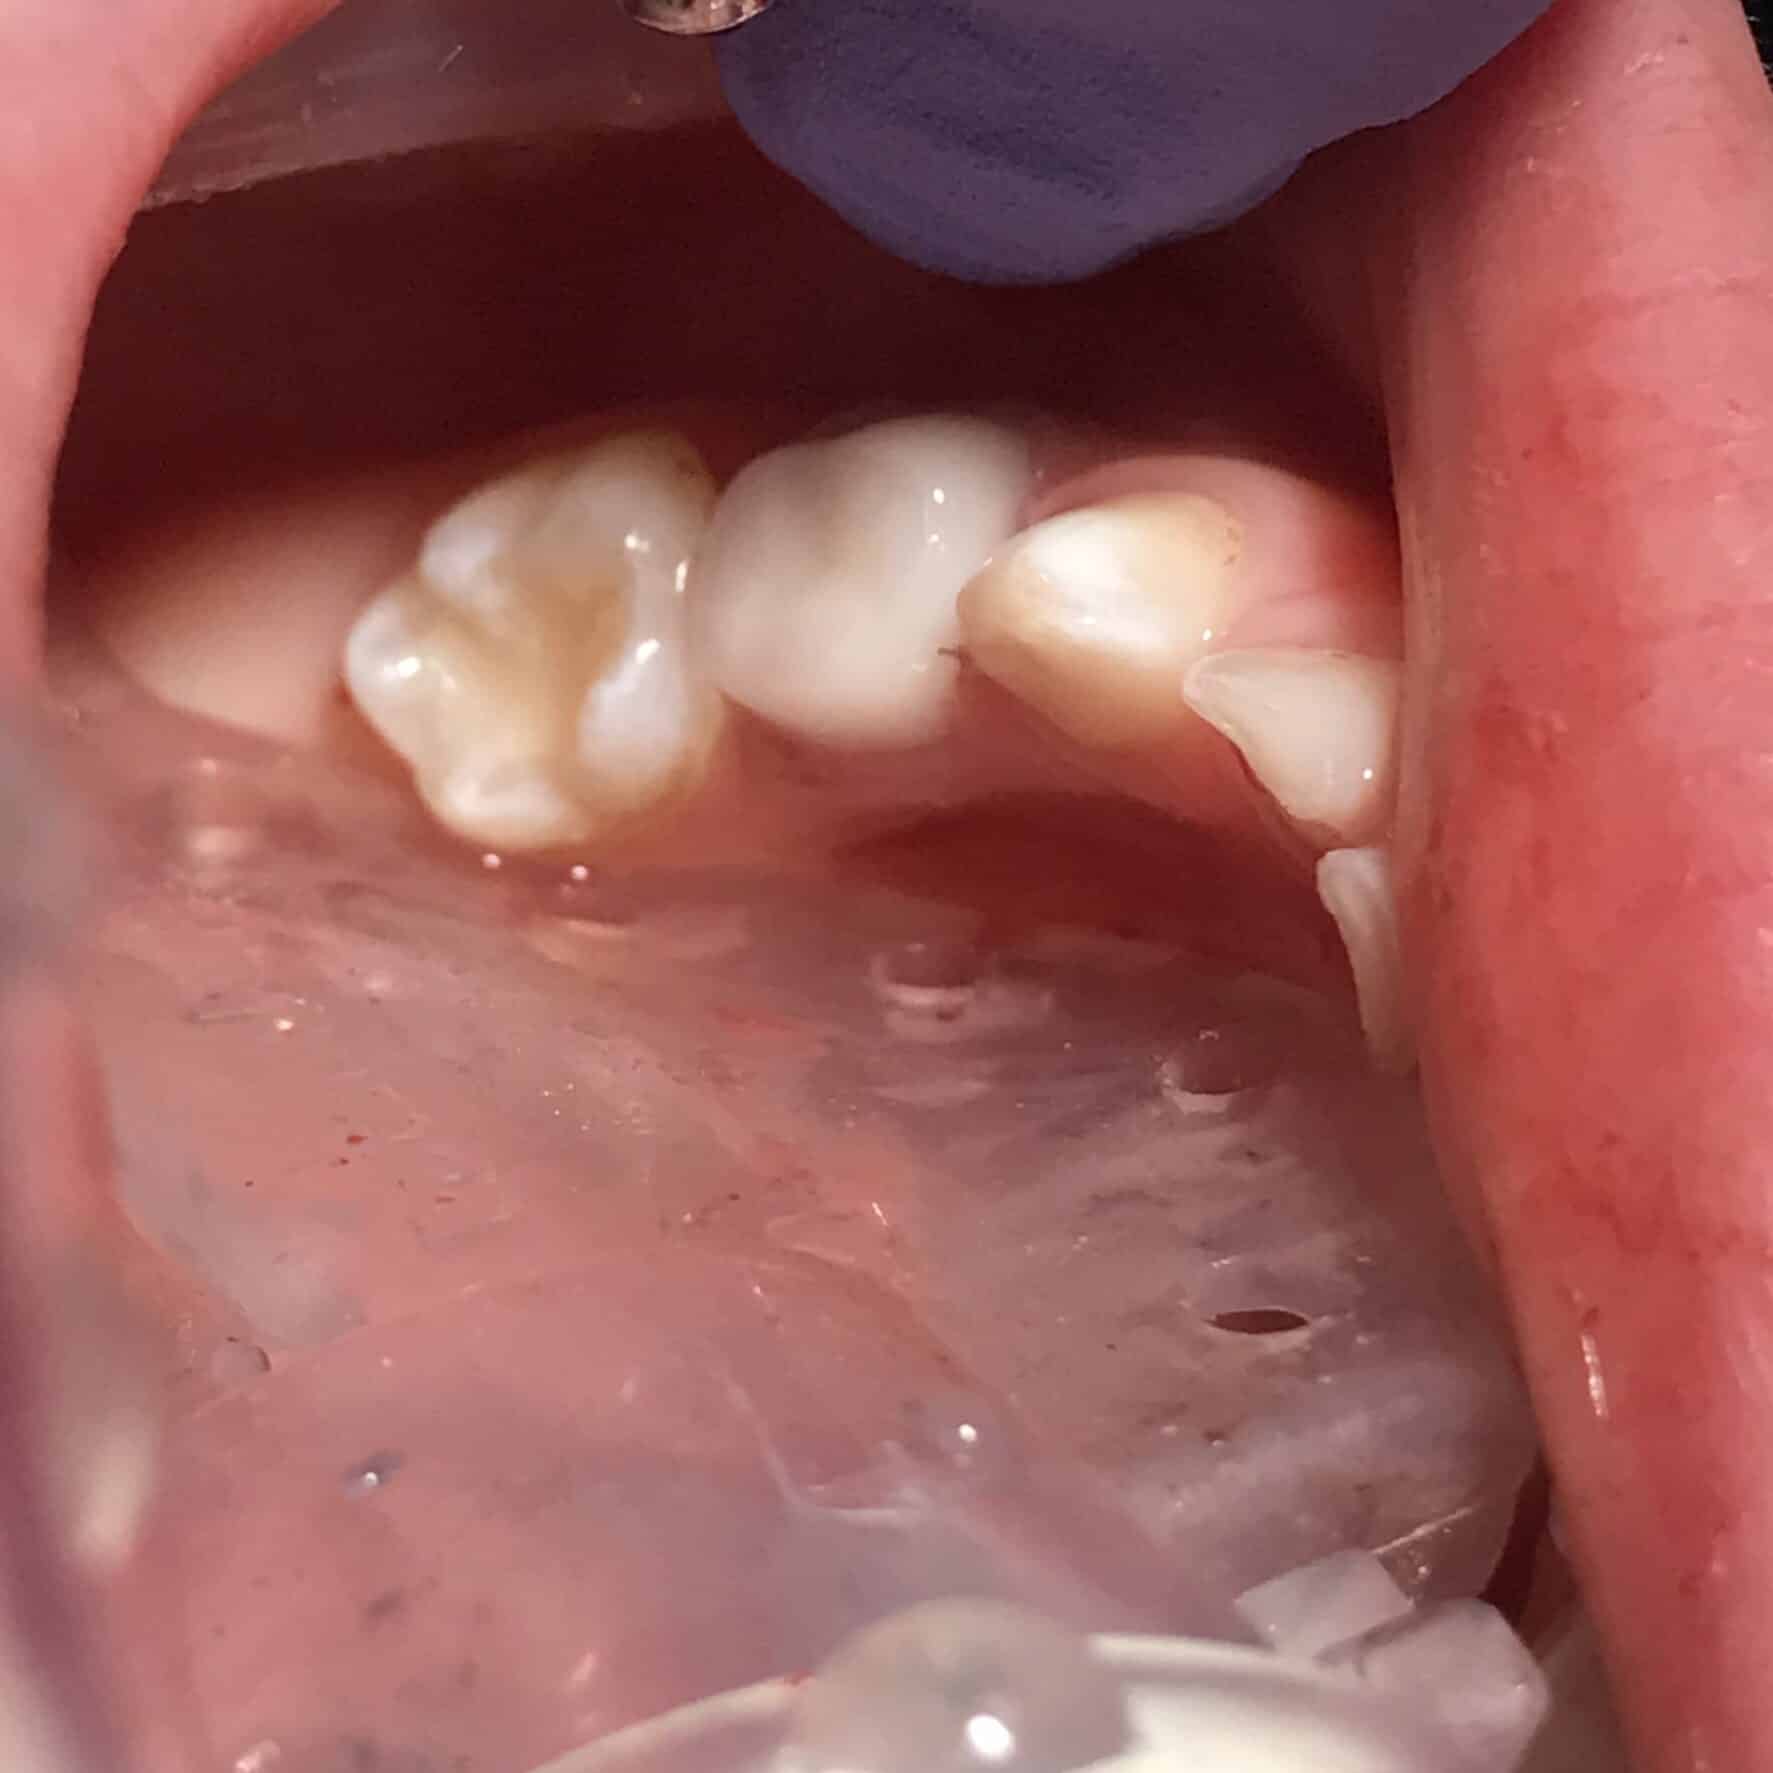 Dental picture taken inside the mouth